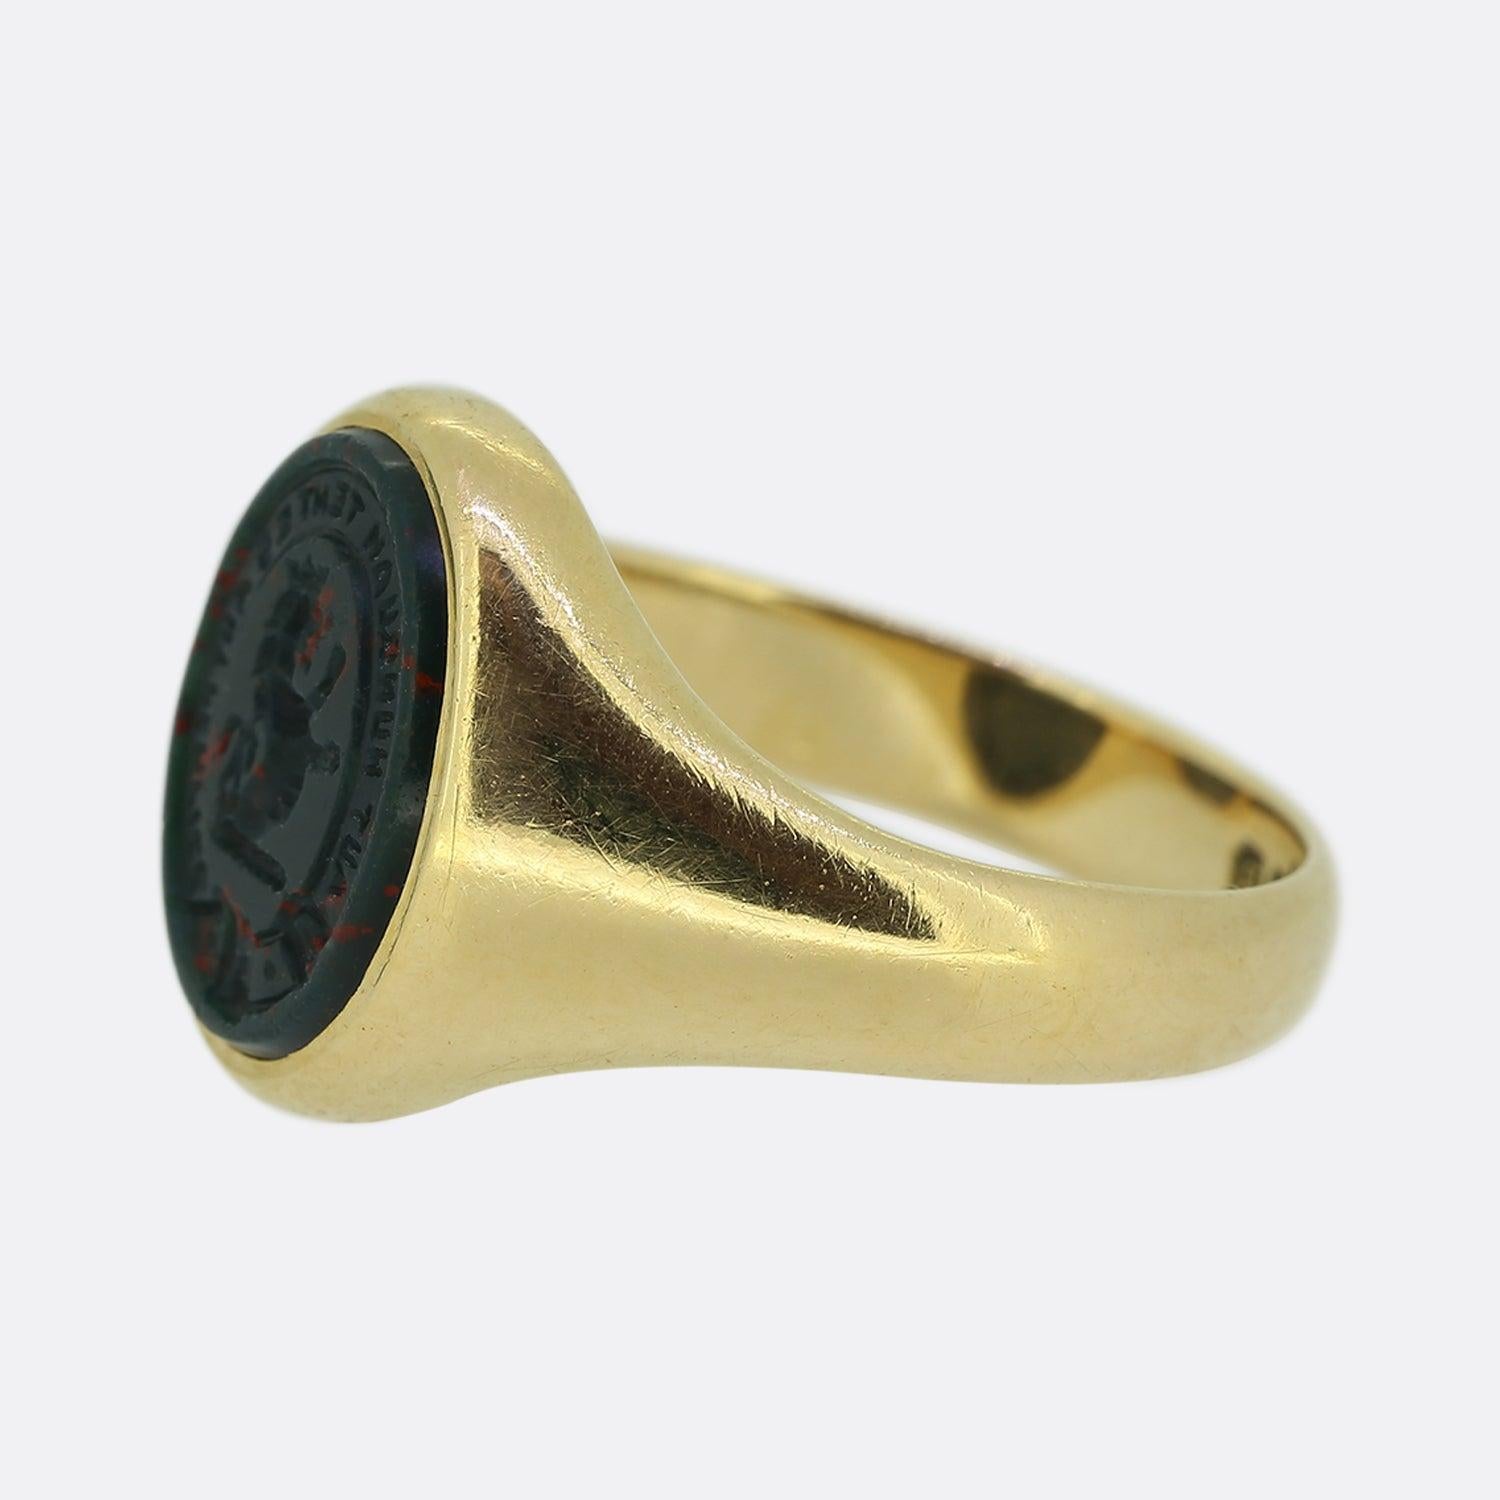 This is a wonderful 18ct yellow gold signet ring that dates back to the Art Deco era. The face of the ring features an engraved bloodstone with a rampant lion in the centre. The lion is surrounded by the Latin words 'Aut nunquam tentes aut ferfice'